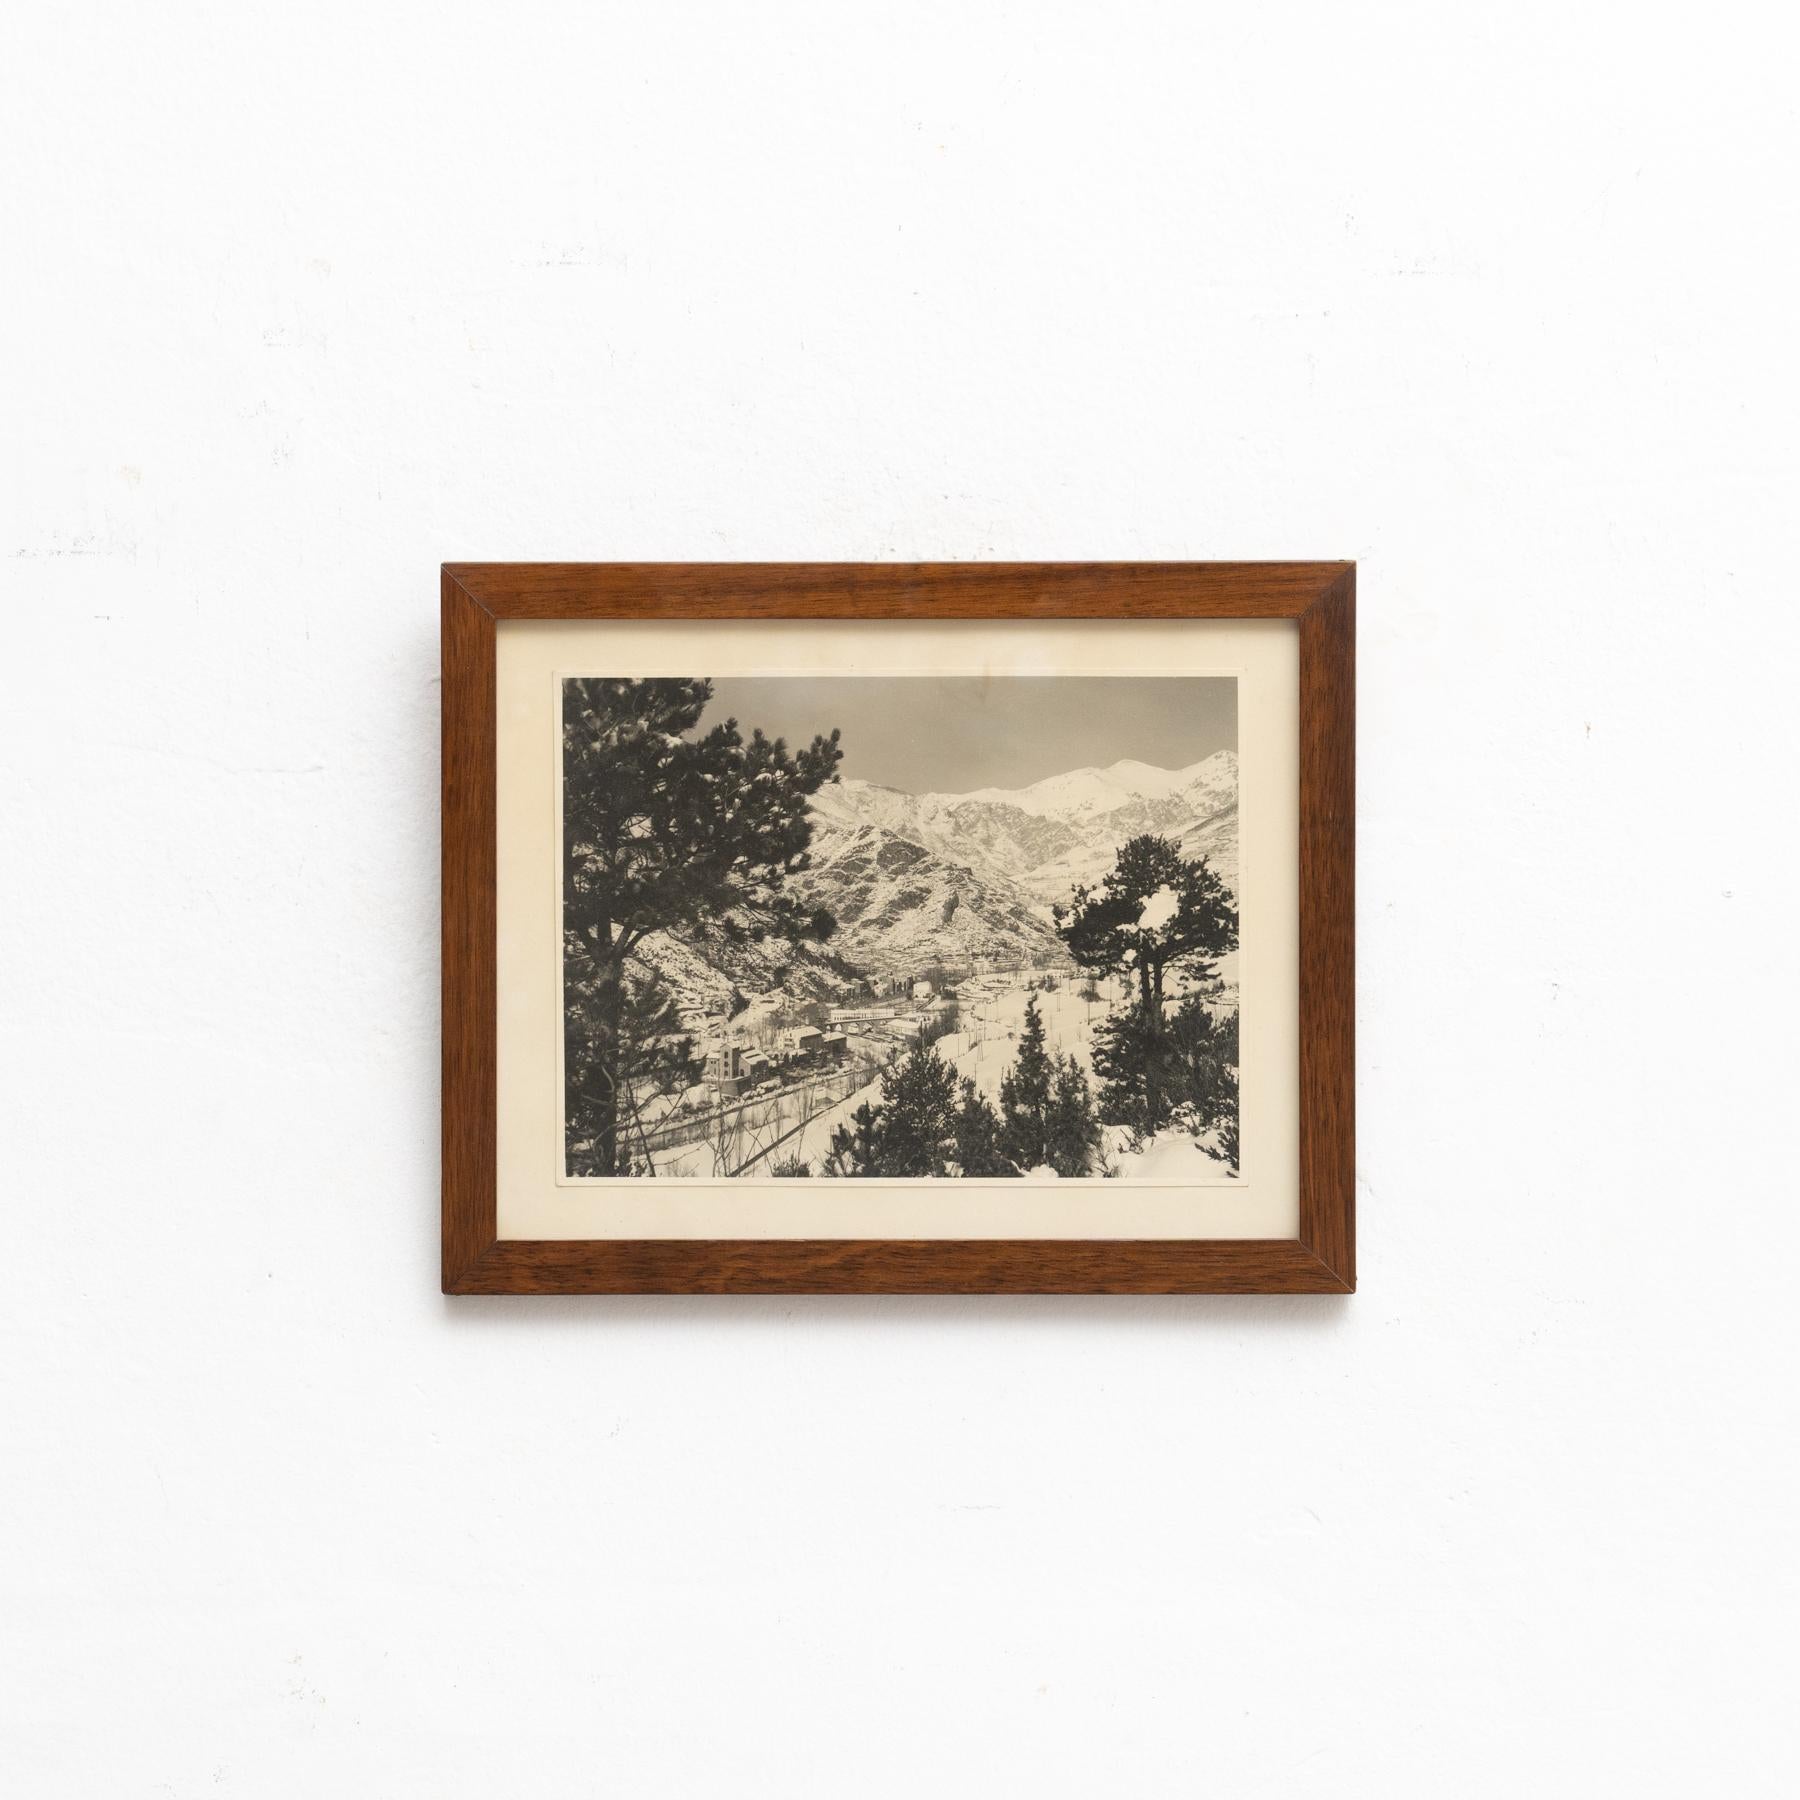 Unsigned black and white photography.

Framed.

Made by unknown artist in Spain, circa 1960.

In original condition, with minor wear consistent with age and use, preserving a beautiful patina.

Materials:
Photographic paper.